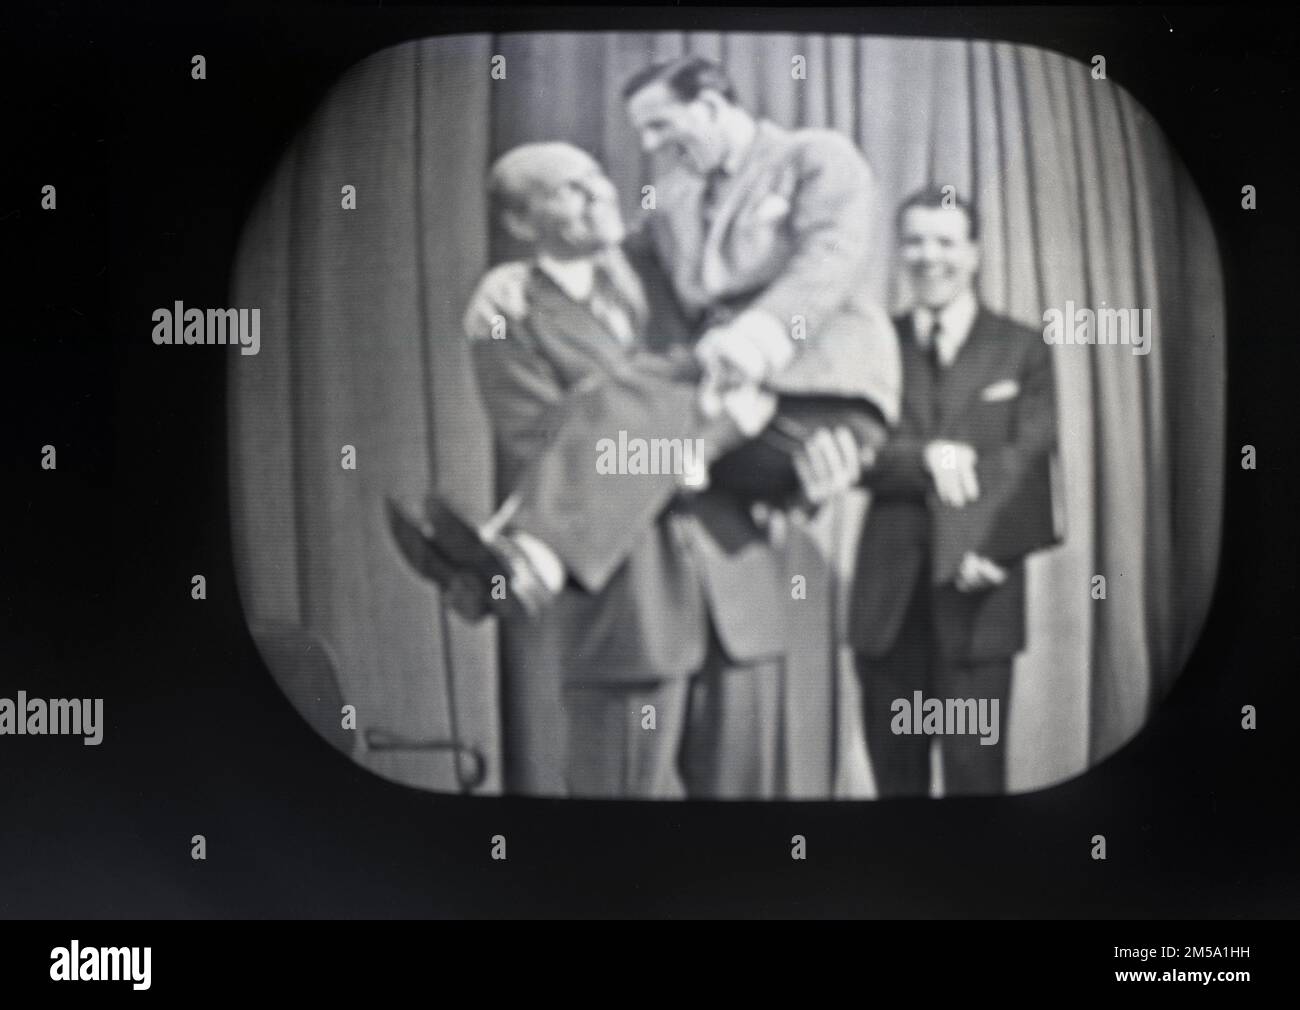 1957, historical, an image from a television broadcast of the British comedic actor, Nornan Wisdom being held up by magician David NIxon on the show, This Is Your Life, presented by Irish broadcaster Eamonn Andrews. This was filmed at the Playhouse Theatre, Manchester. Wisdom was also a subject of This Is Your Life again in 1987. Andrews was the show's host from 1955 to 1964 and again from 1969 to 1987. The British version, first shown in 1955 on the BBC was presented by its American creator Ralph Edwards and its subject was Eamonn Andrews, who would go on to become its much-loved host. Stock Photo